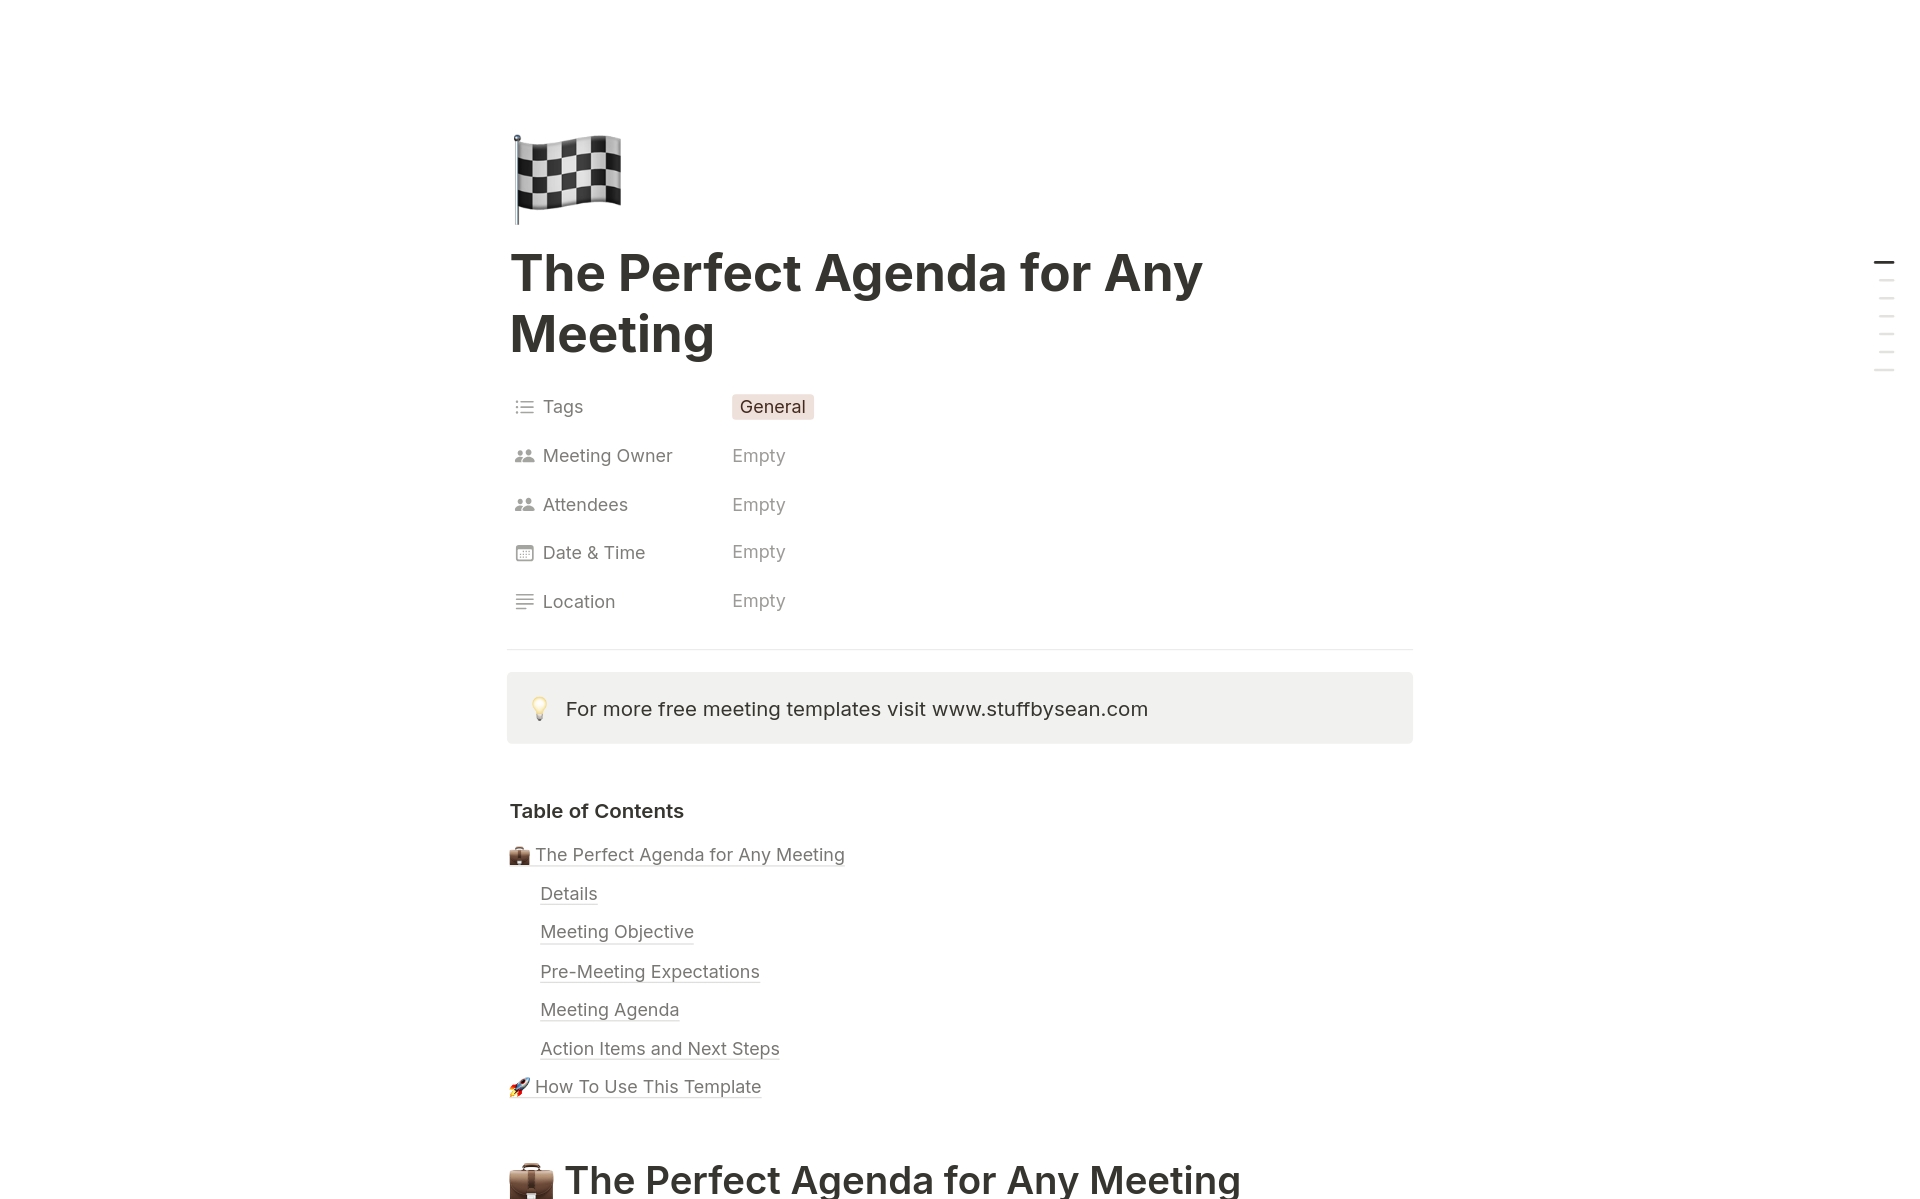 Maximize efficiency with the perfect meeting agenda template! Tailored for any meeting, ensure clarity in objectives, pre-meeting prep, a streamlined agenda, and clear action items. Transform your meetings now!